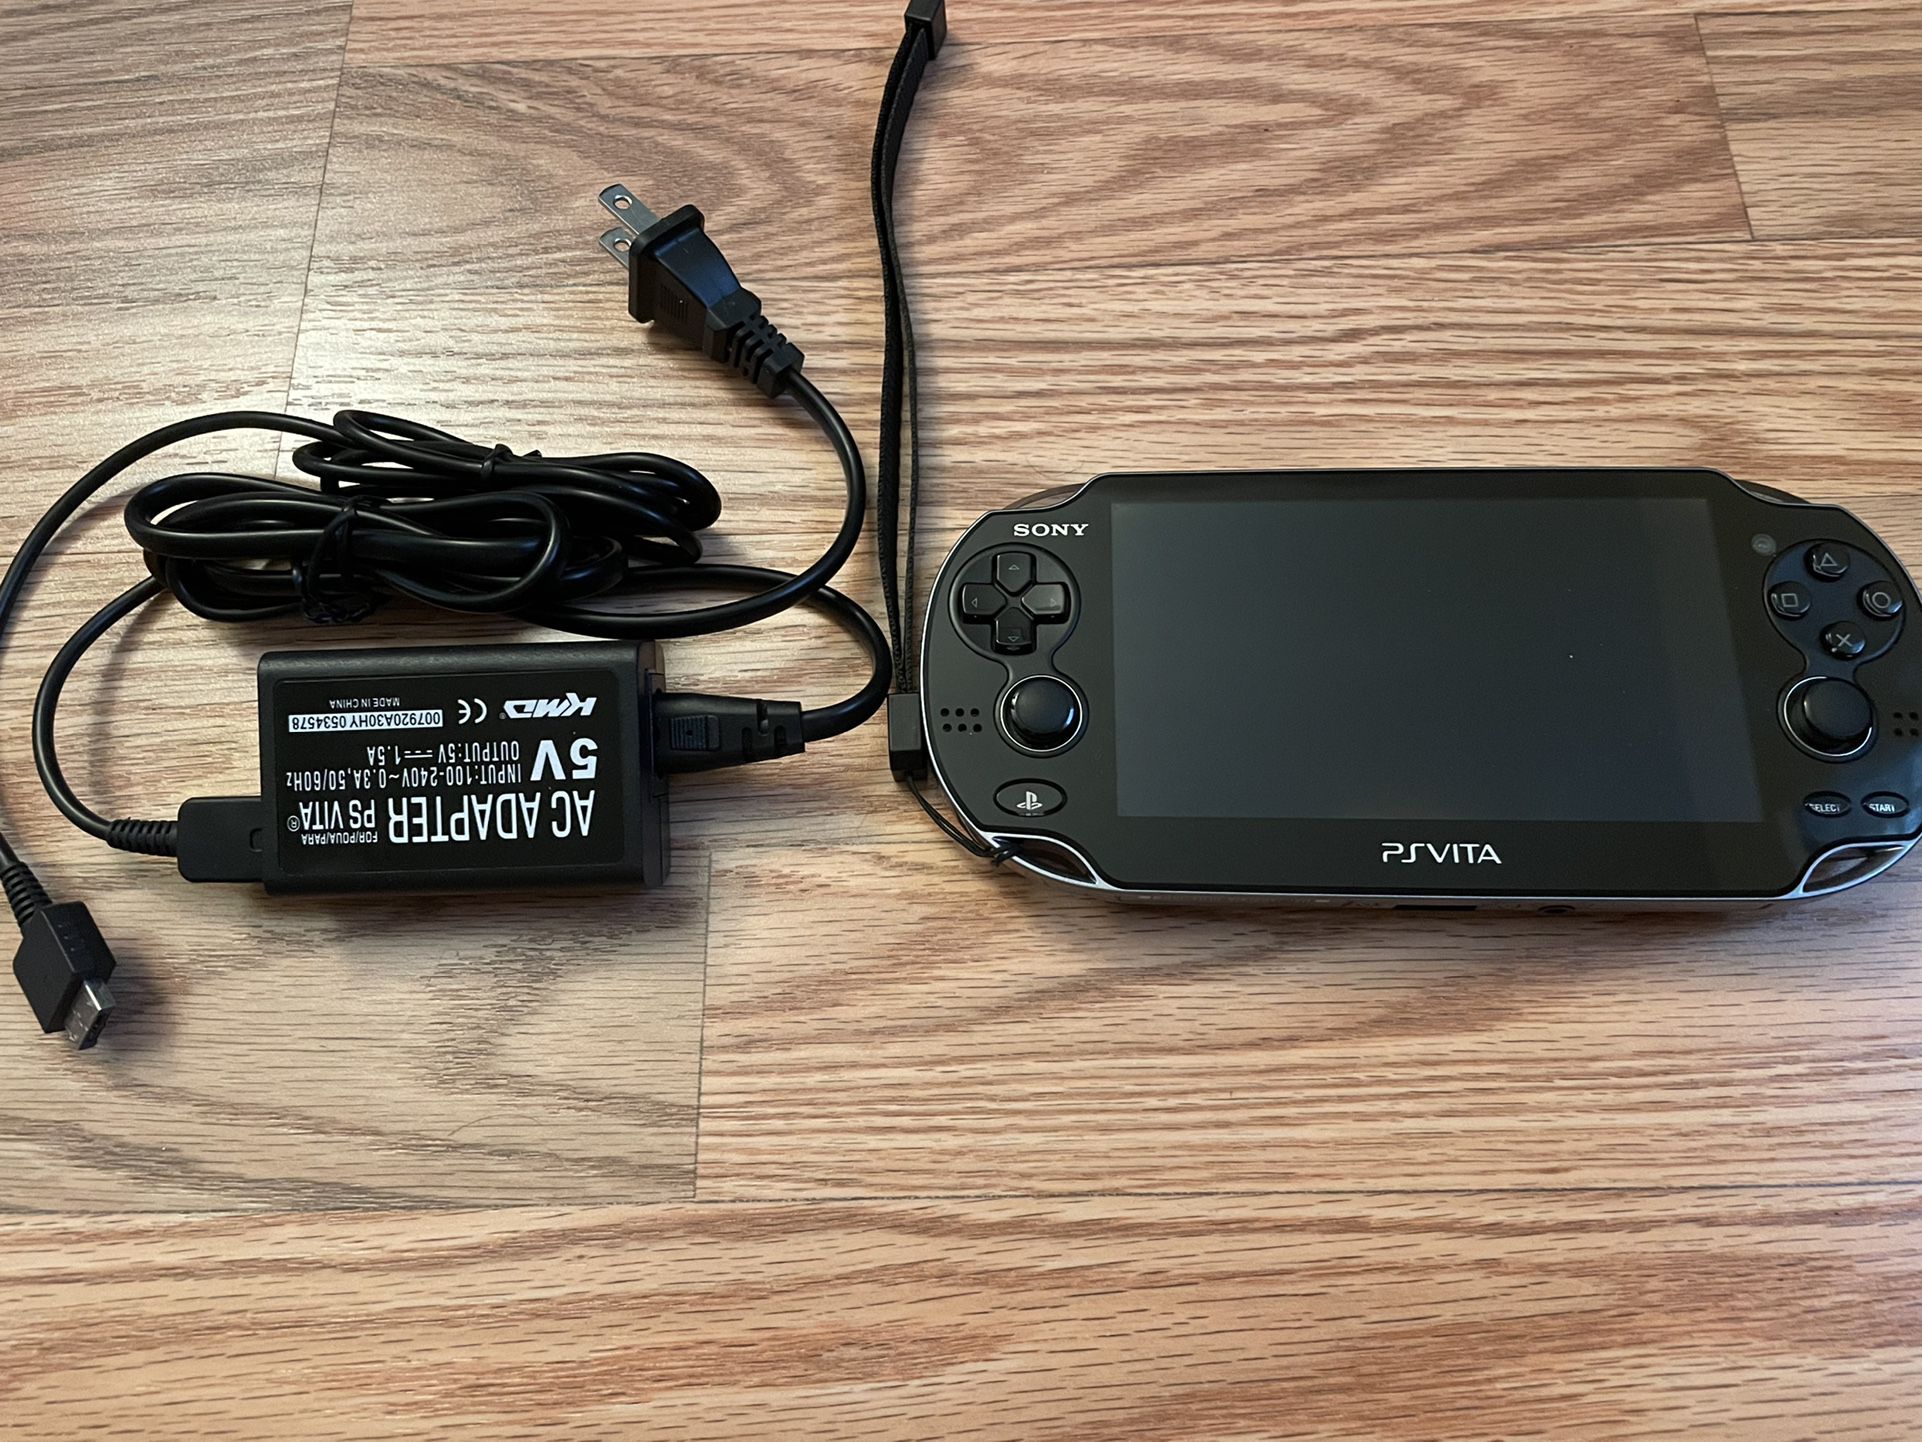 Sony Ps Vita Wi Fi Oled Console Pch 1000 Japan Model For Sale In Suisun City Ca Offerup